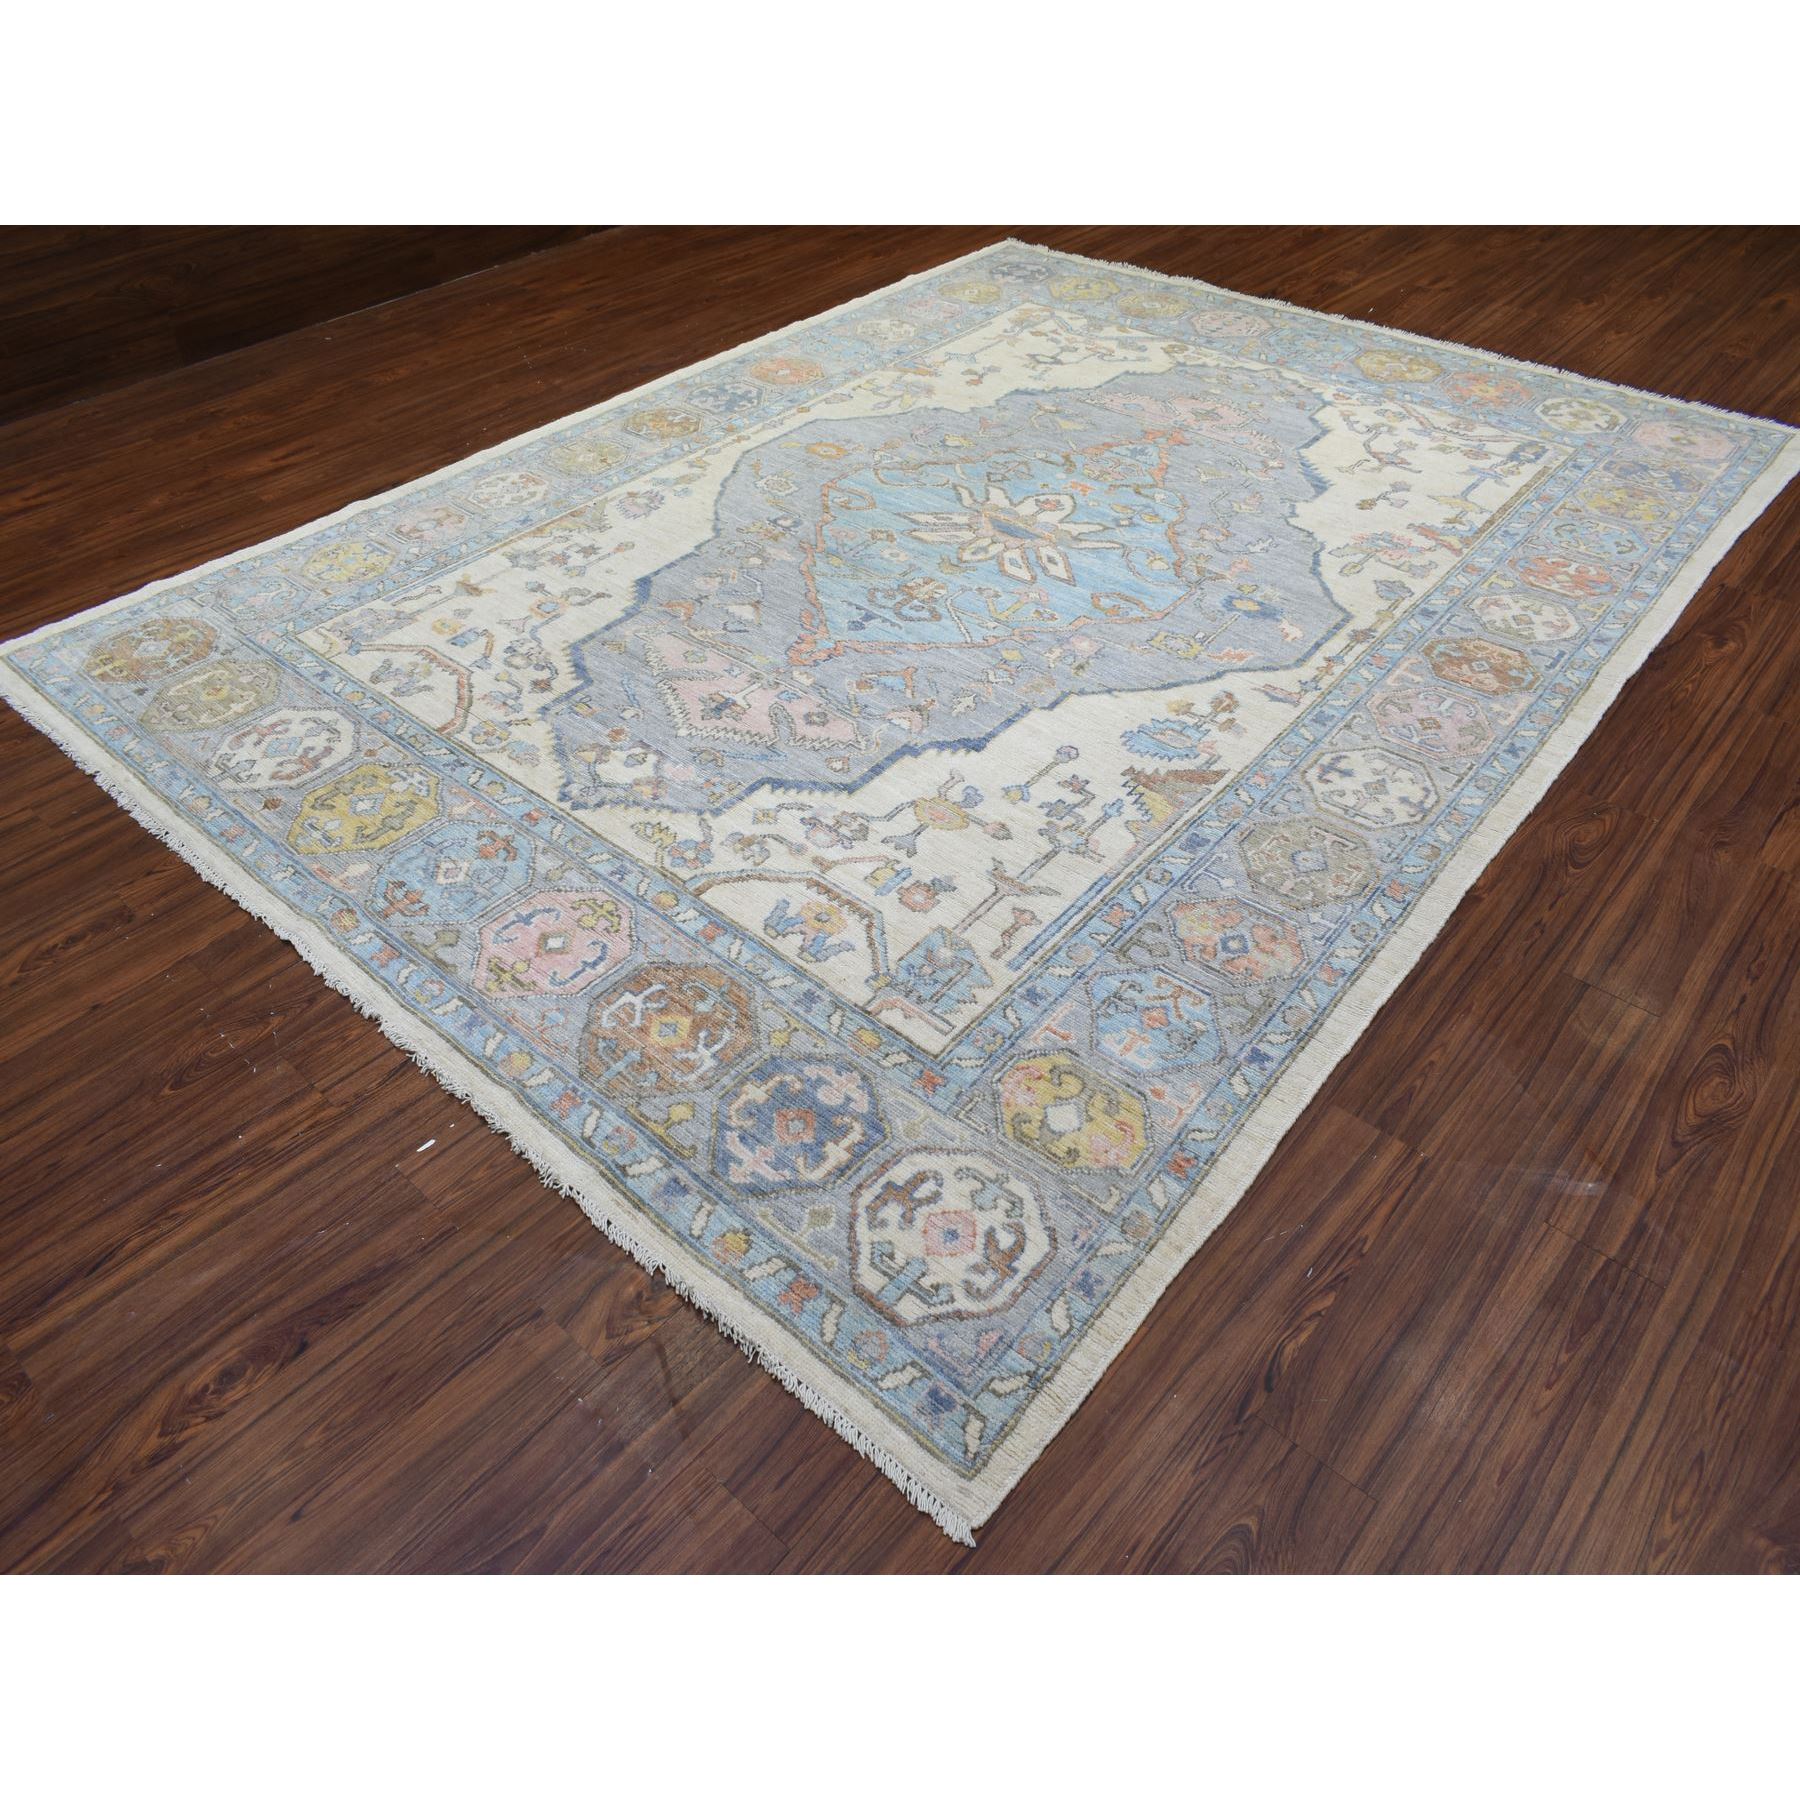 8'10"x11'7"Light Blue, Hand Woven Anatolian Village Inspired with Large Medalliaon Design, Natural Dyes Soft Wool Oriental Rug 